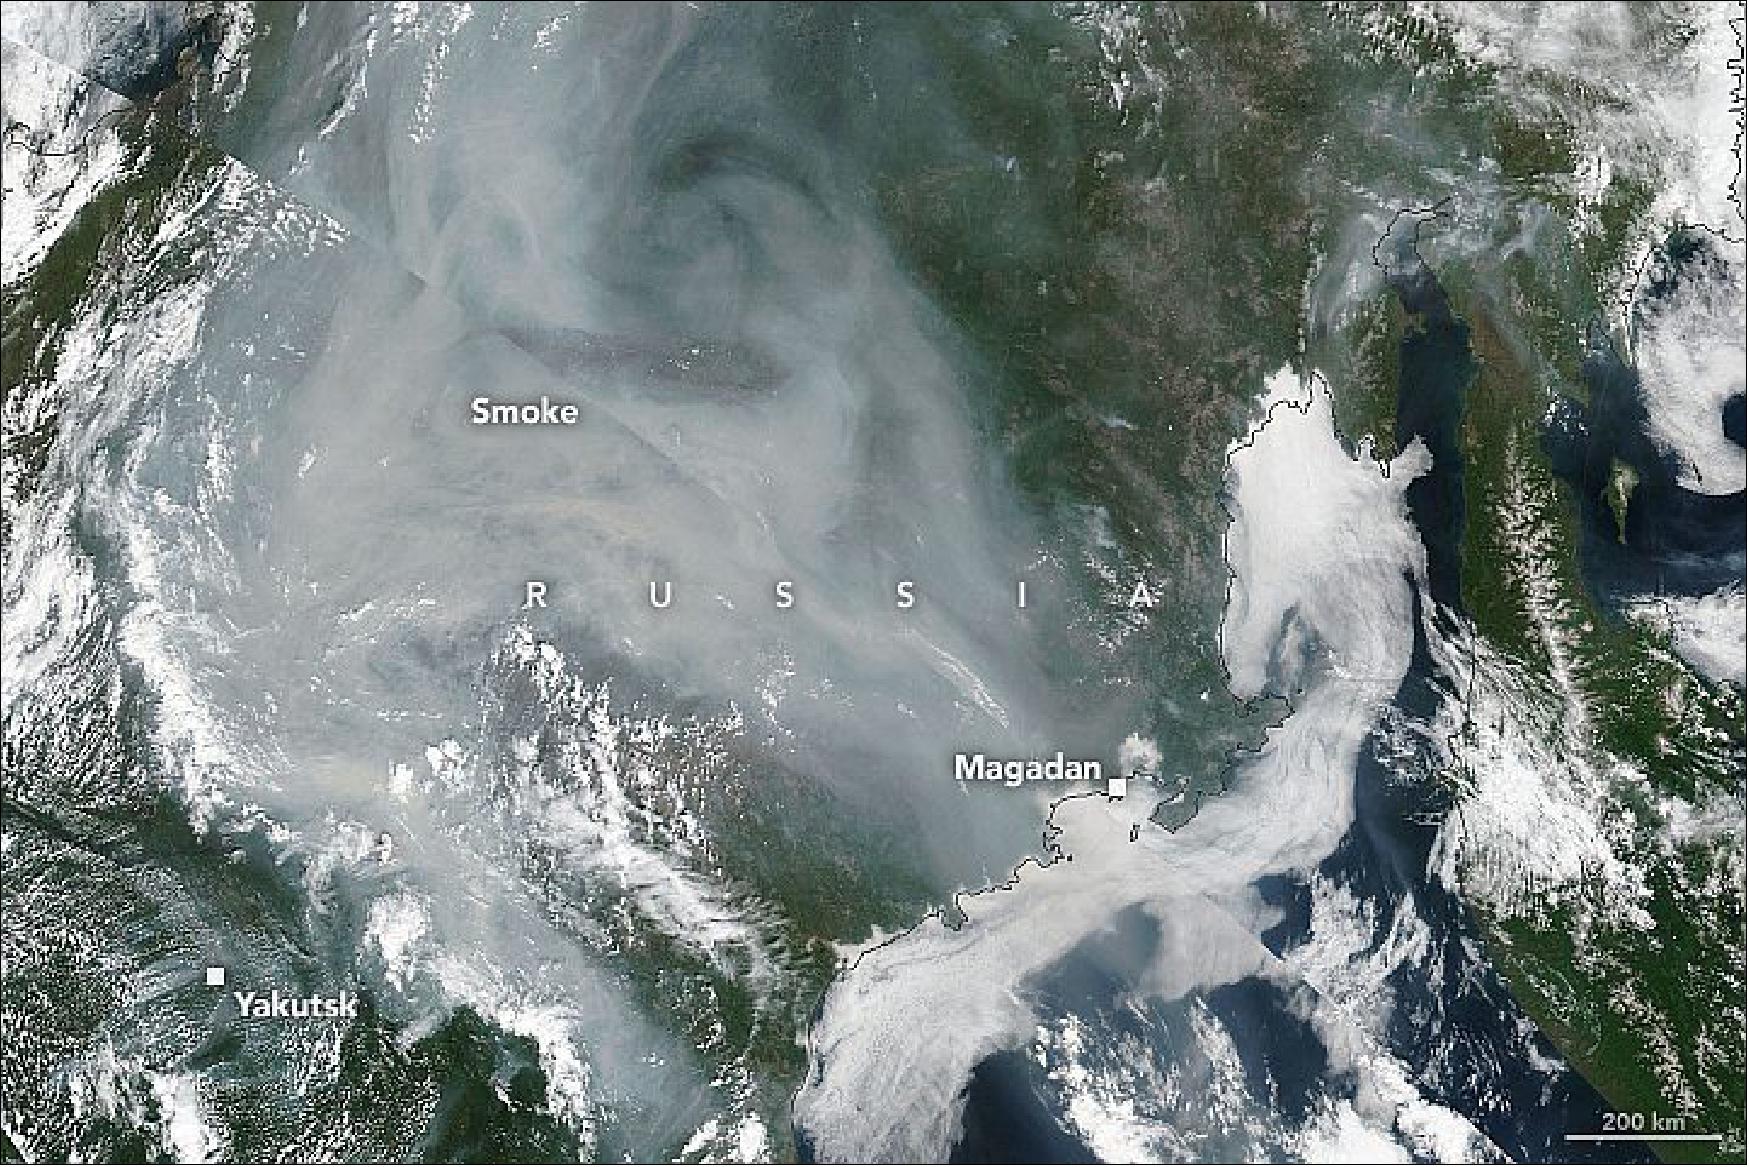 Figure 40: Large, smoky fires are raging through forests in northeastern Russia. The VIIRS (Visible Infrared Imaging Radiometer Suite) on Suomi NPP acquired this natural-color image of large clouds of smoke enveloping the Republic of Sakha (Yakutia) on July 5, 2021. Satellite data indicates that several small fires burned intermittently in the area for weeks, but several exploded in size during the last week of June (image credit: NASA Earth Observatory images by Lauren Dauphin, using MODIS data from NASA EOSDIS LANCE and GIBS/Worldview and Landsat data from the U.S. Geological Survey. Story by Adam Voiland)